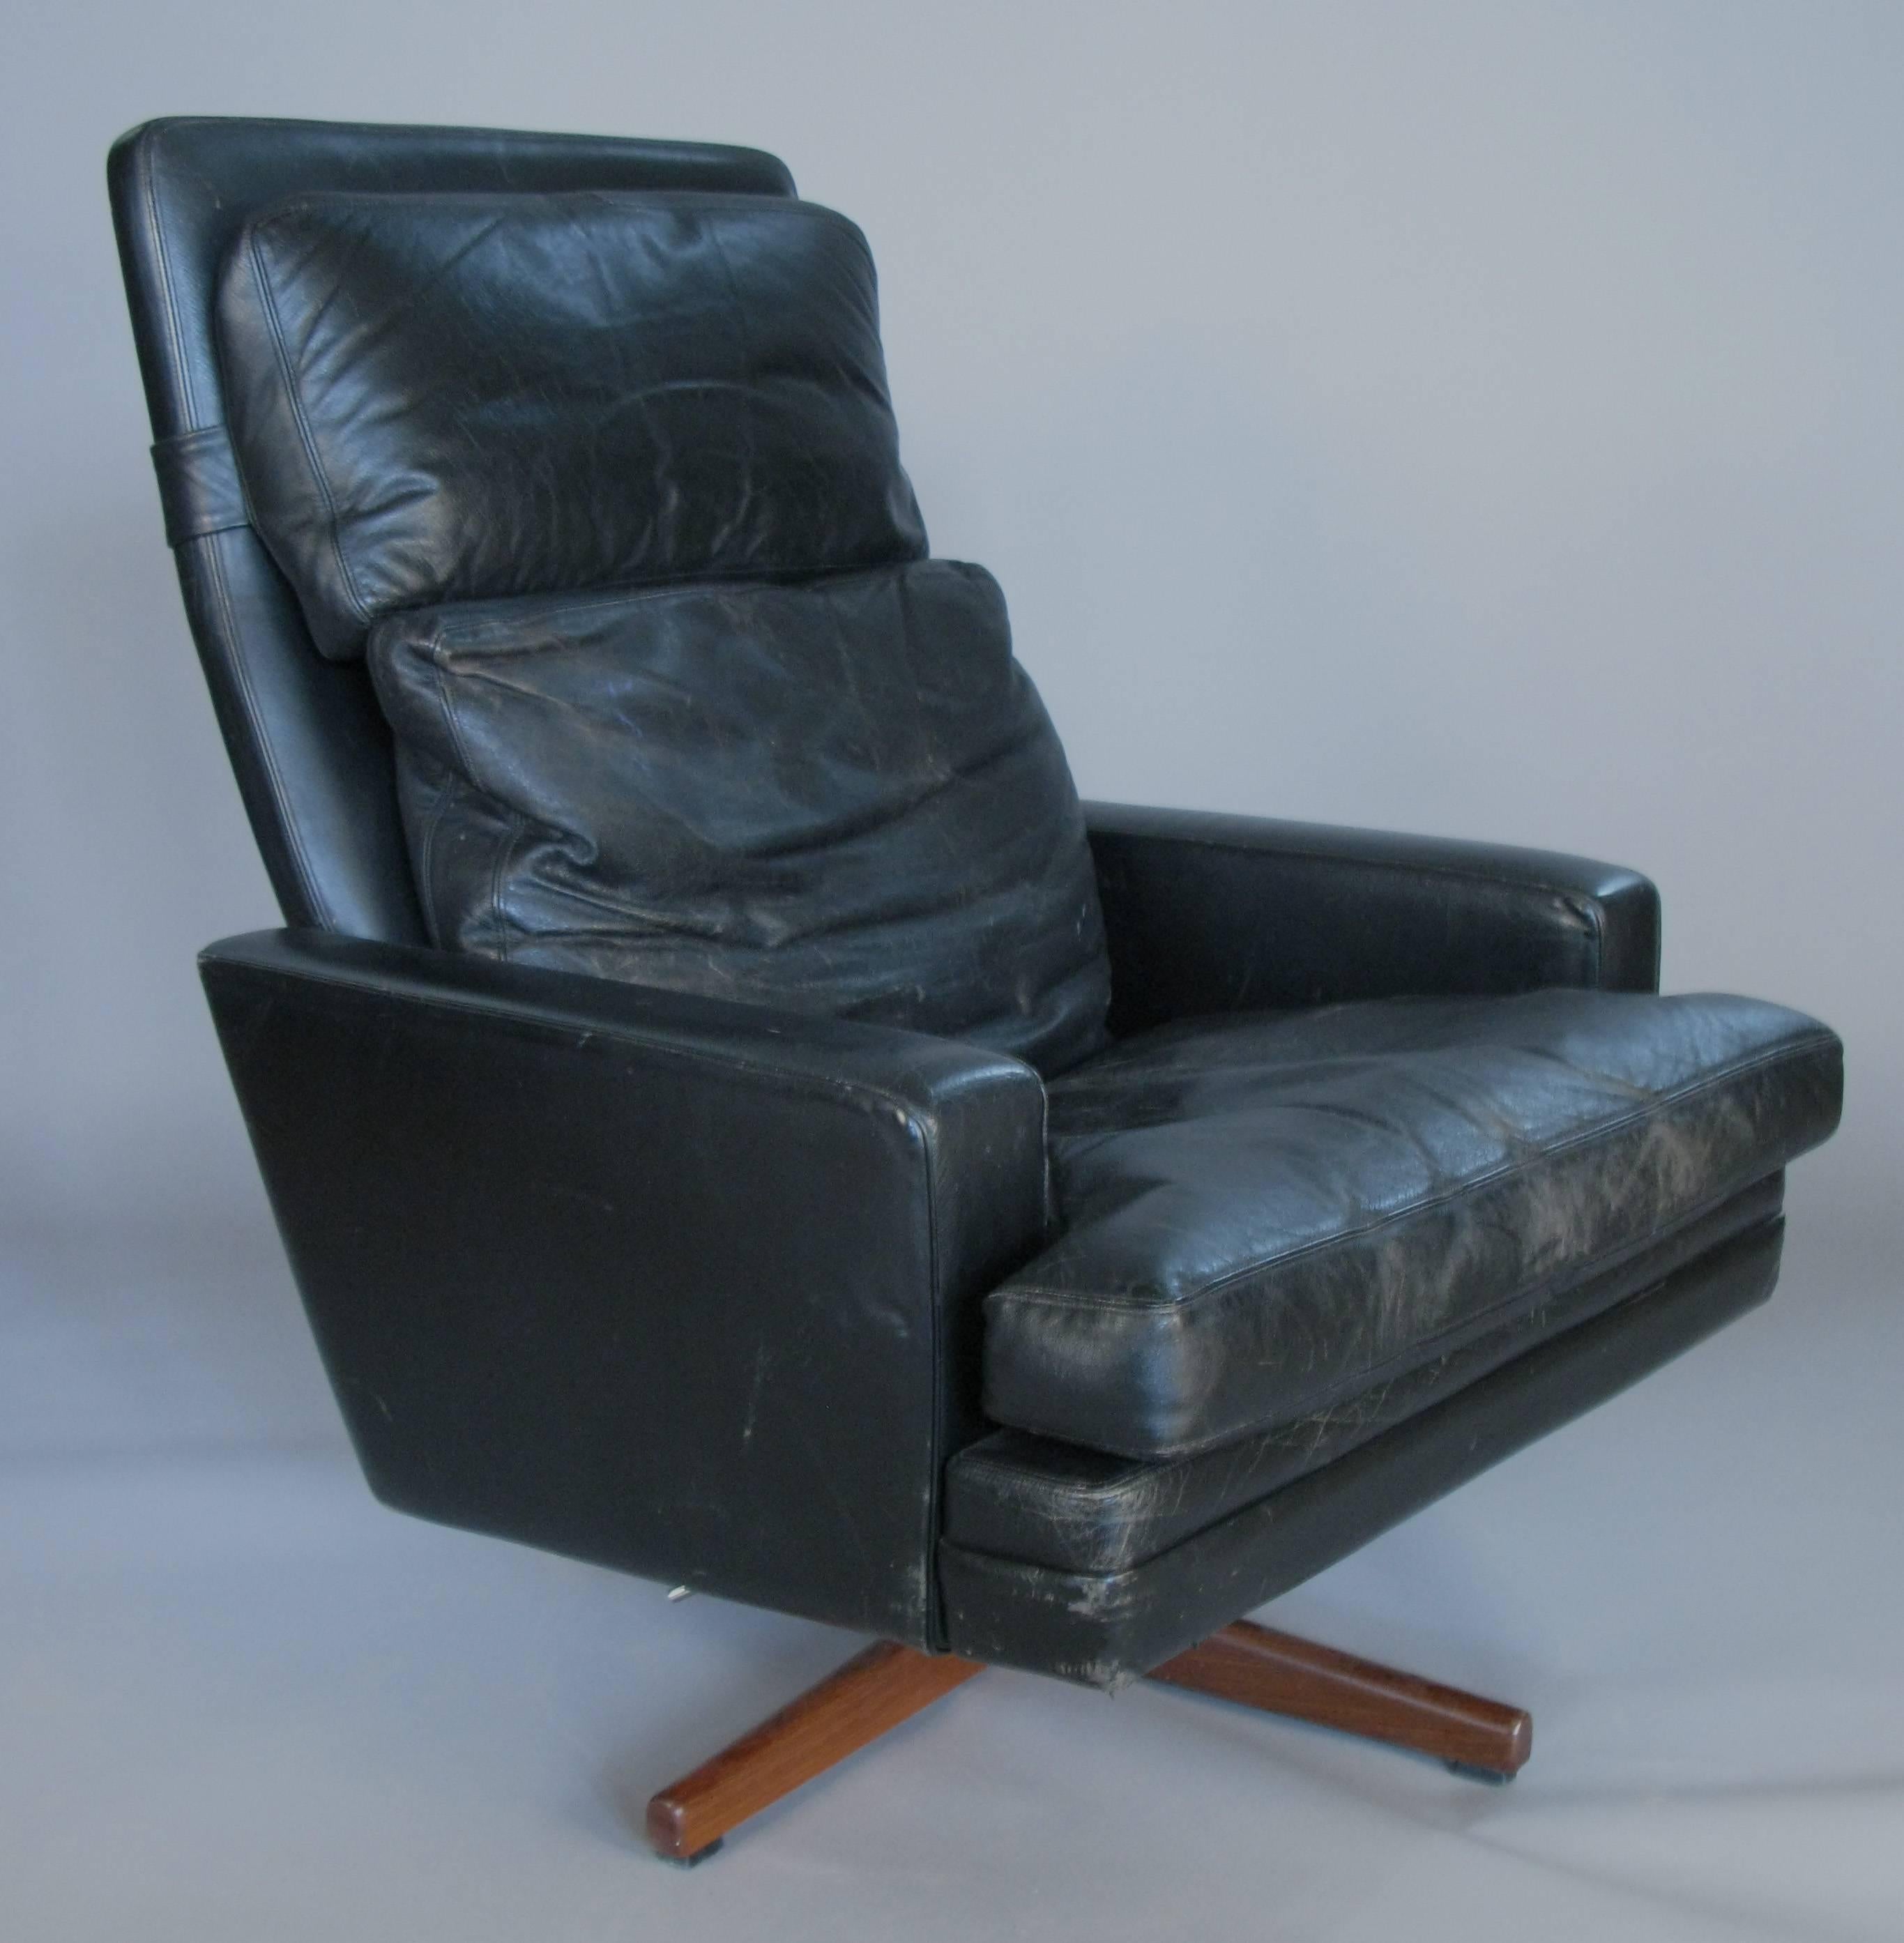 Danish Leather and Rosewood Swivel Tilt Lounge Chair by Fredrik Kayser